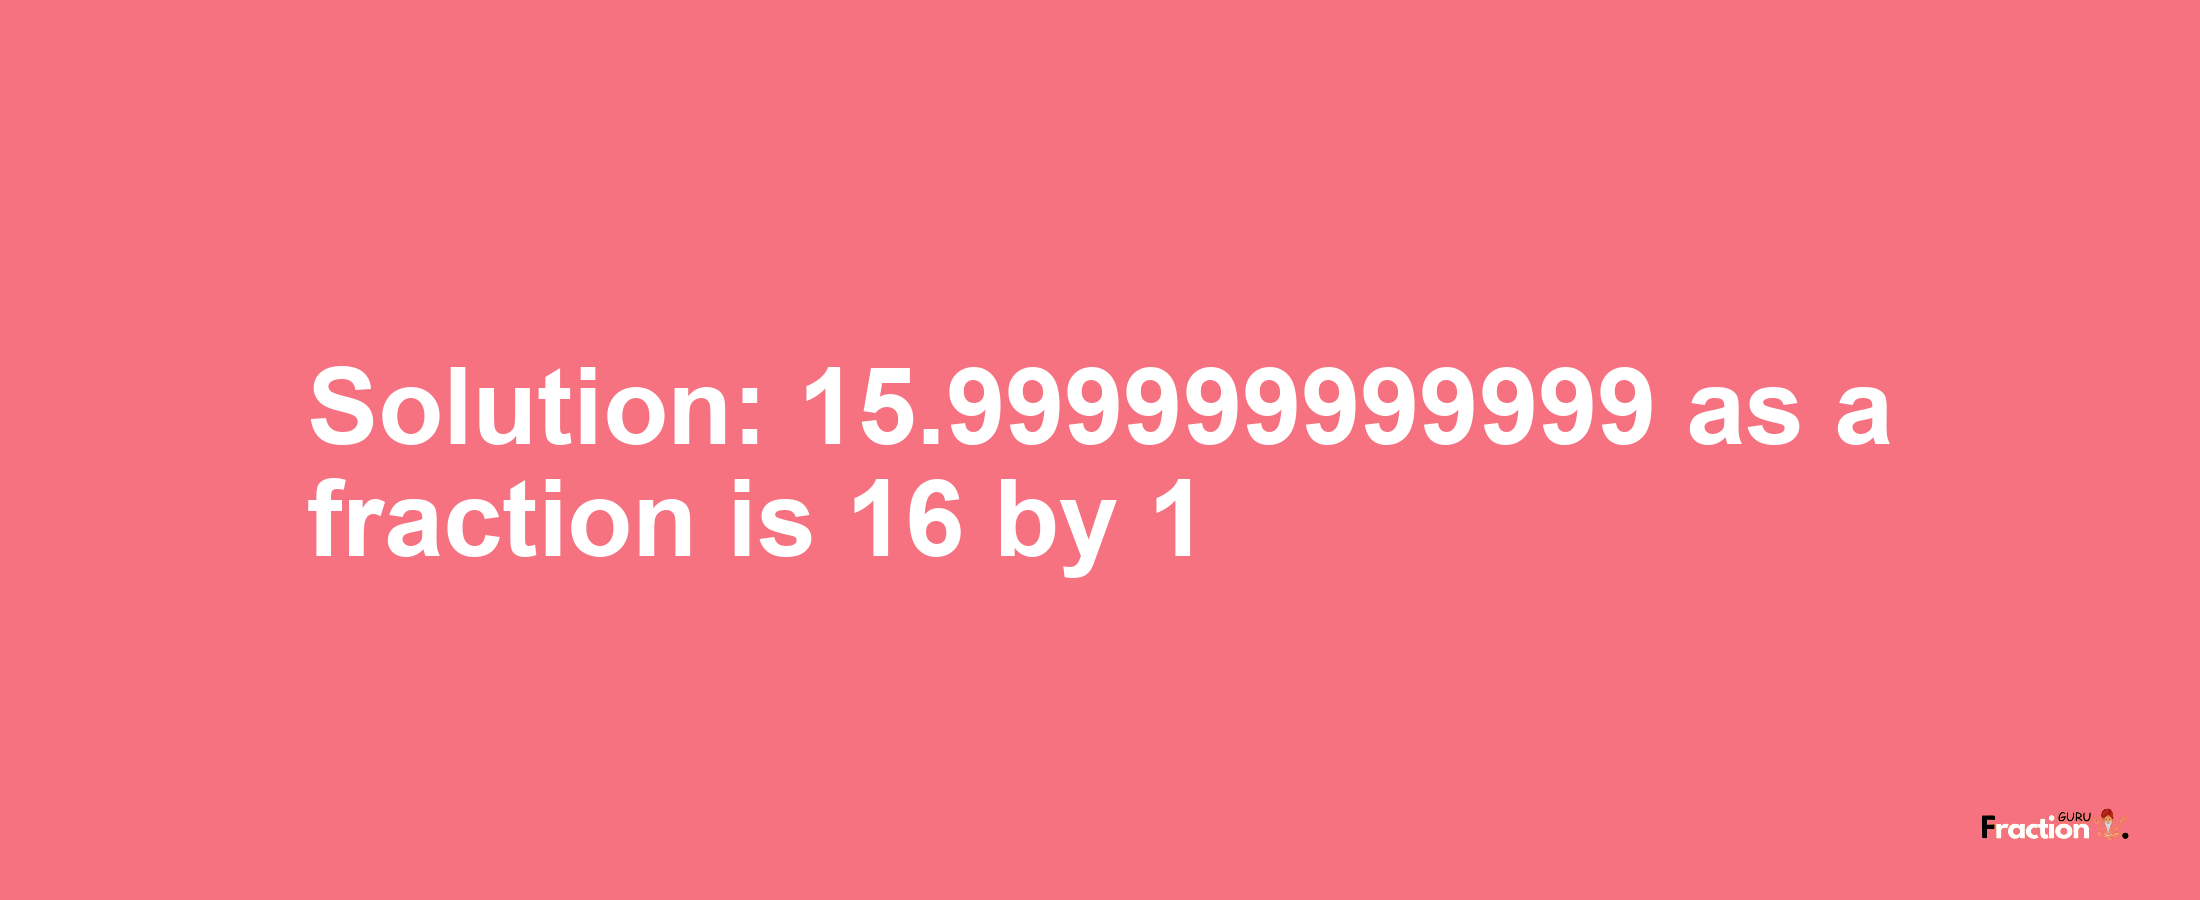 Solution:15.999999999999 as a fraction is 16/1